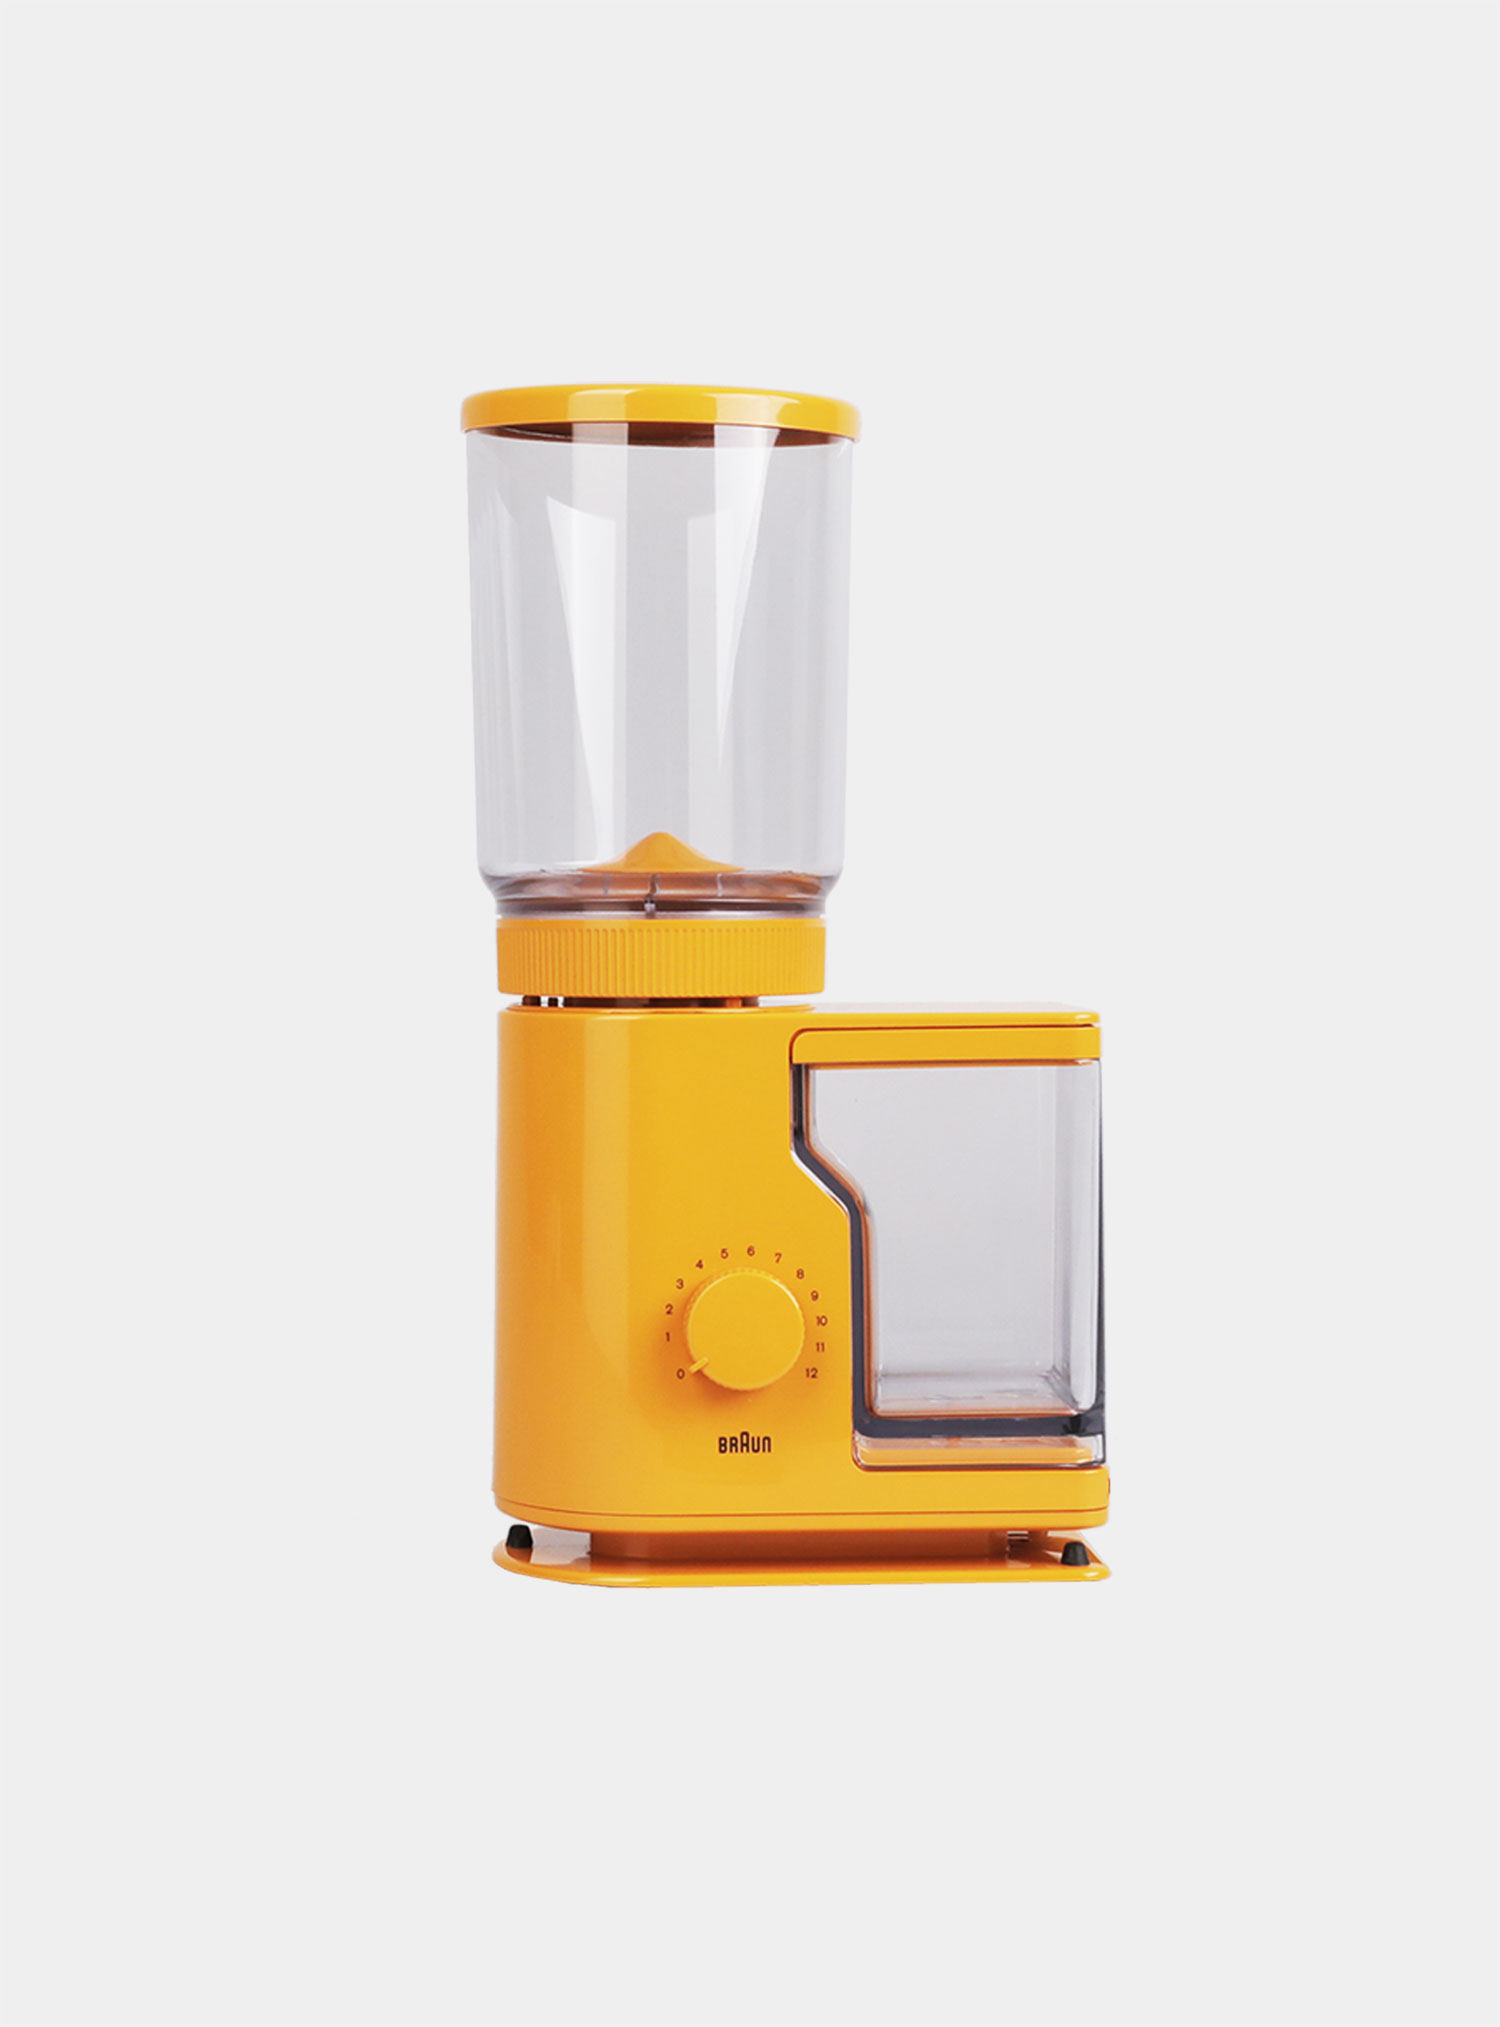 https://onlyonceshop.com/media/pages/product/braun-kmm-20-coffee-grinder/062c83206b-1650541407/braun-kmm-coffee-grinder-yellow.jpg